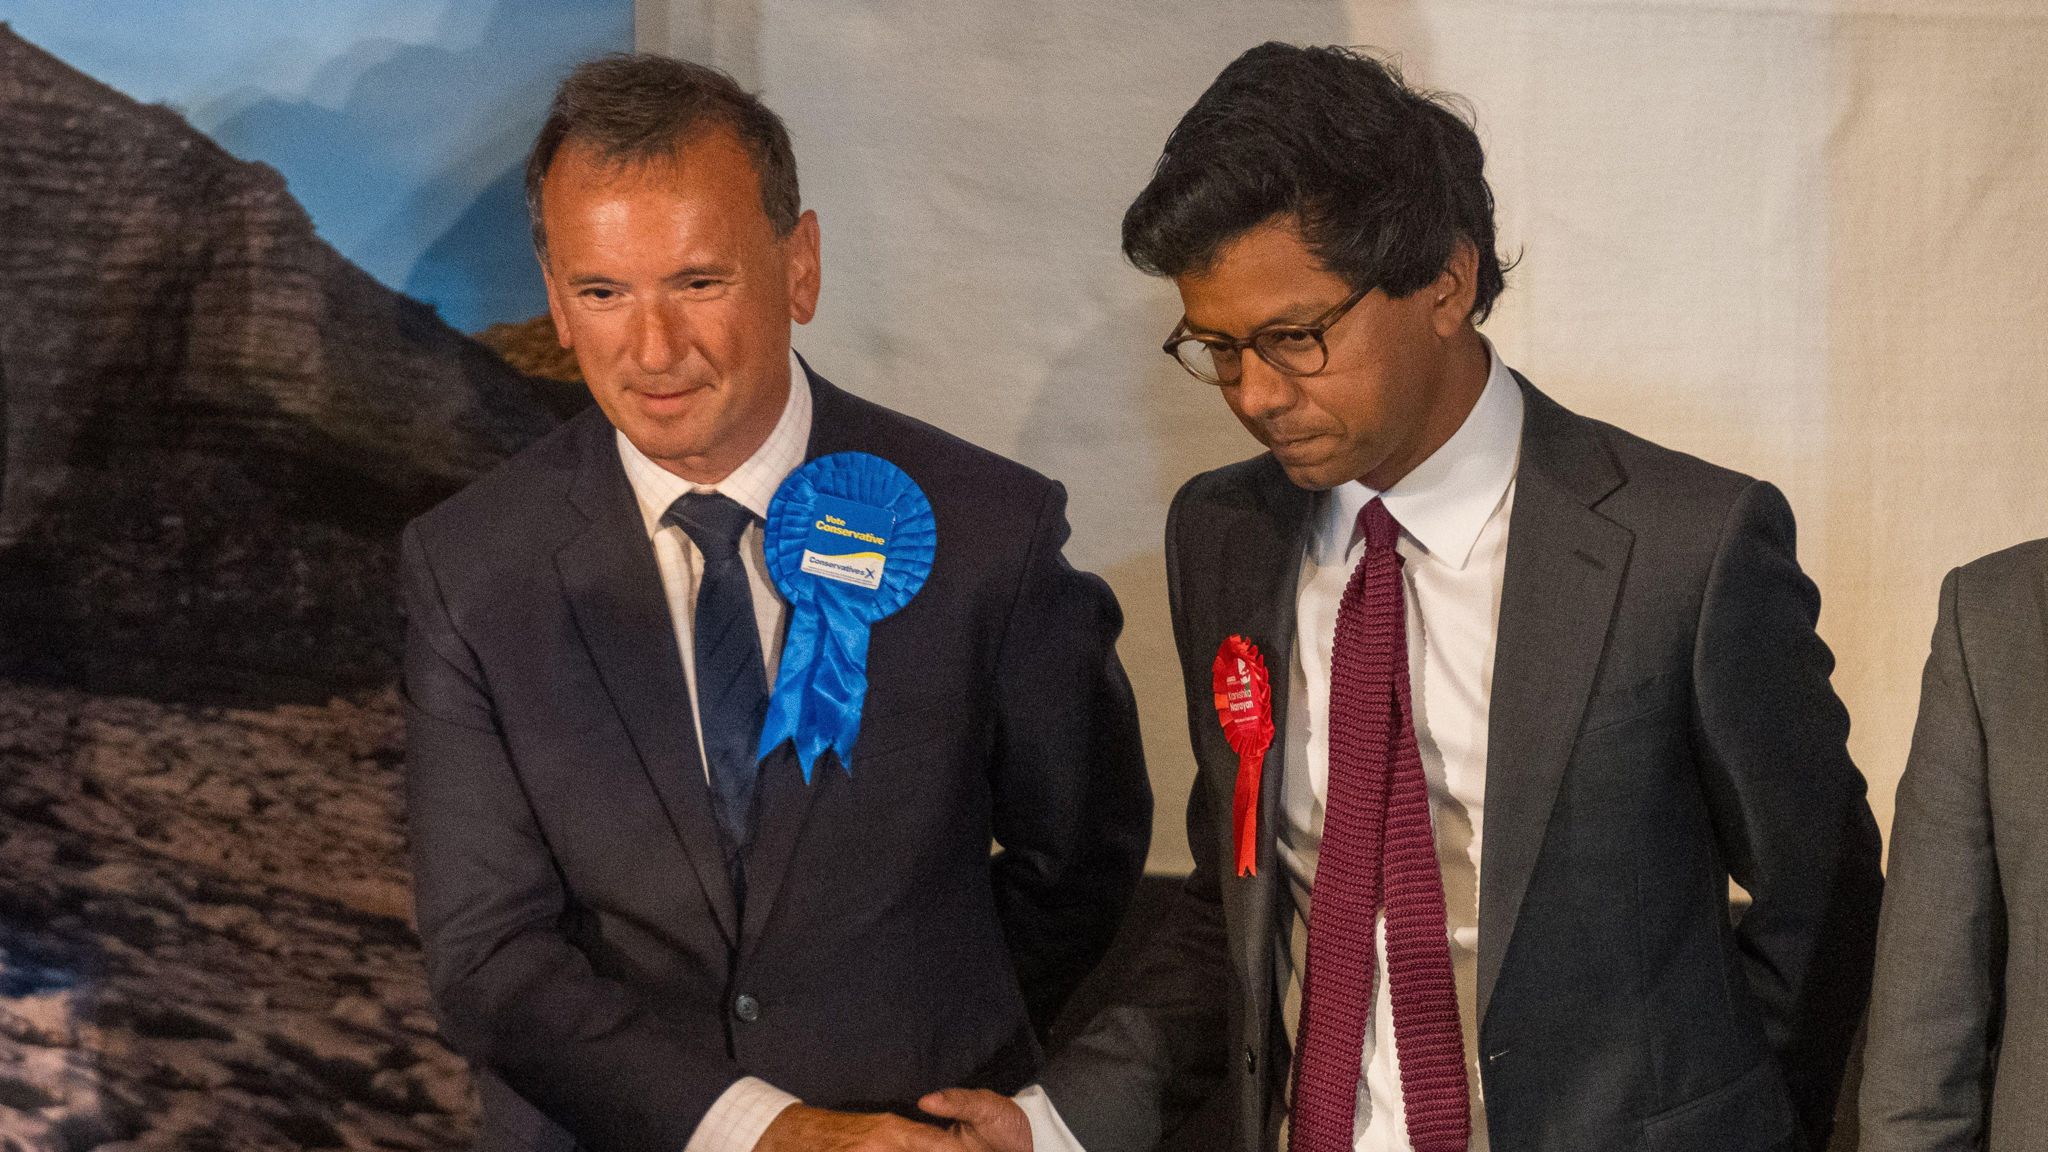 Alun Cairns concedes defeat to Labour's Kanishka Narayan in the Vale of Glamorgan